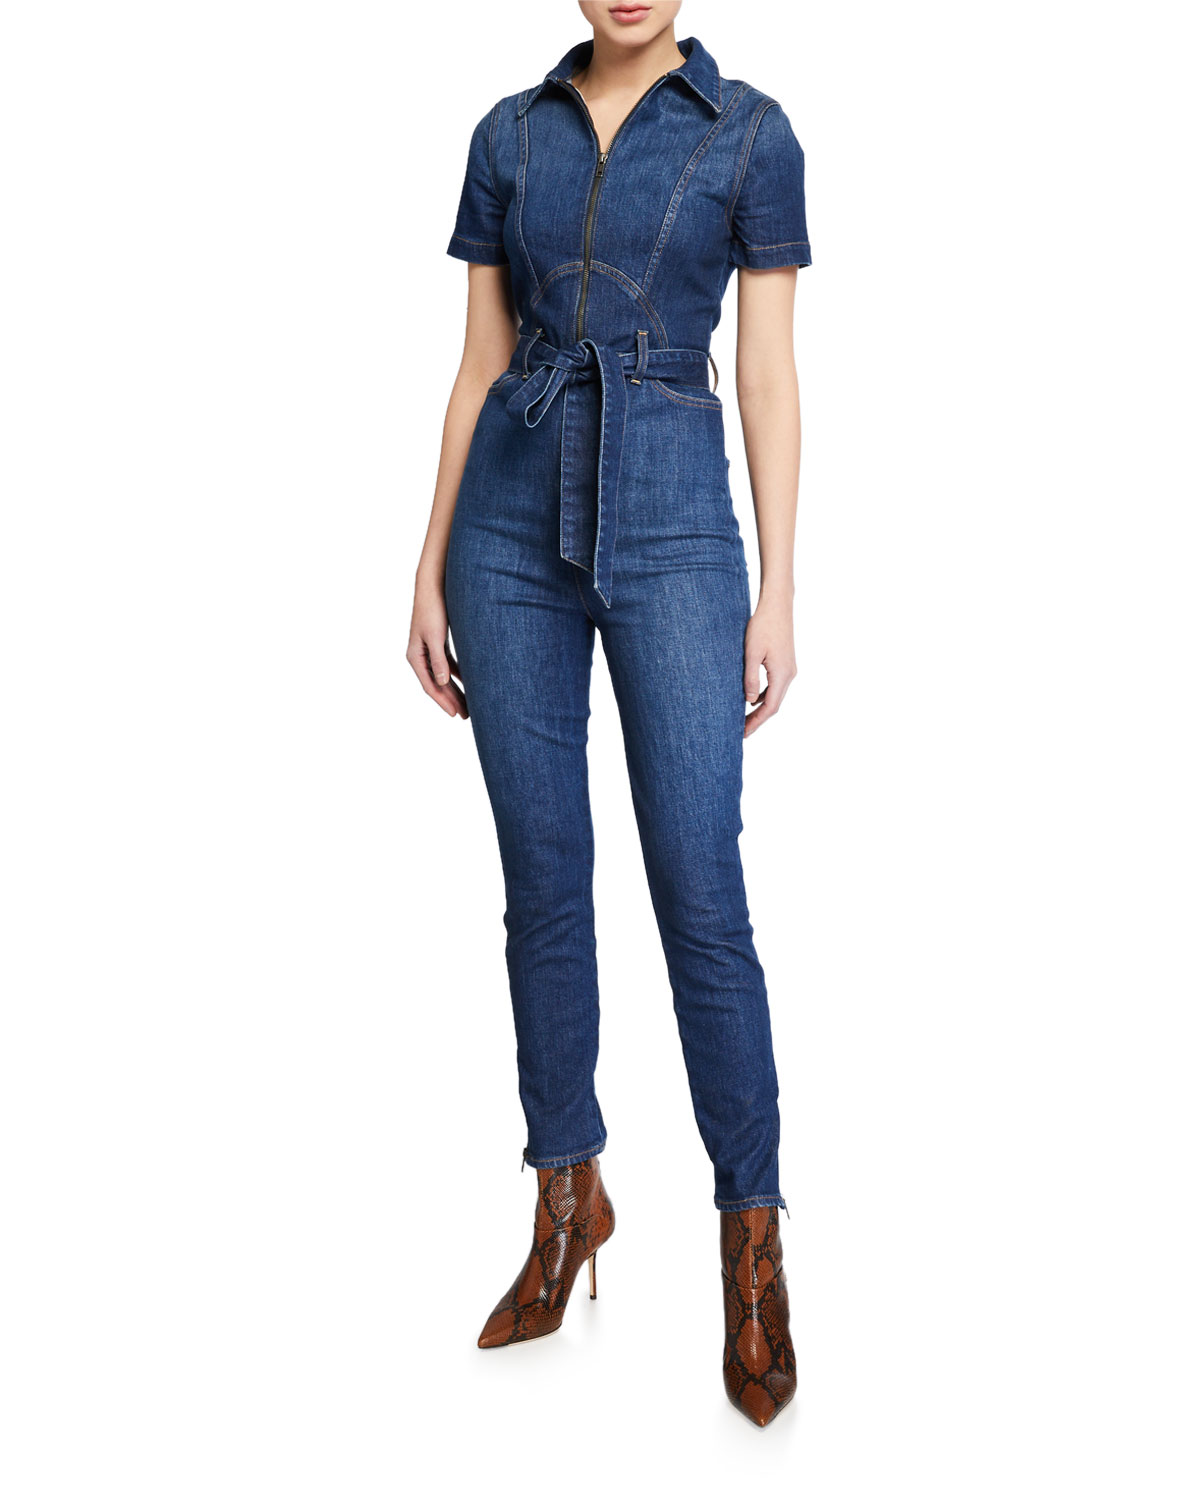 ALICE + OLIVIA JEANS Gorgeous Denim Catsuit - Lifestyle For Women